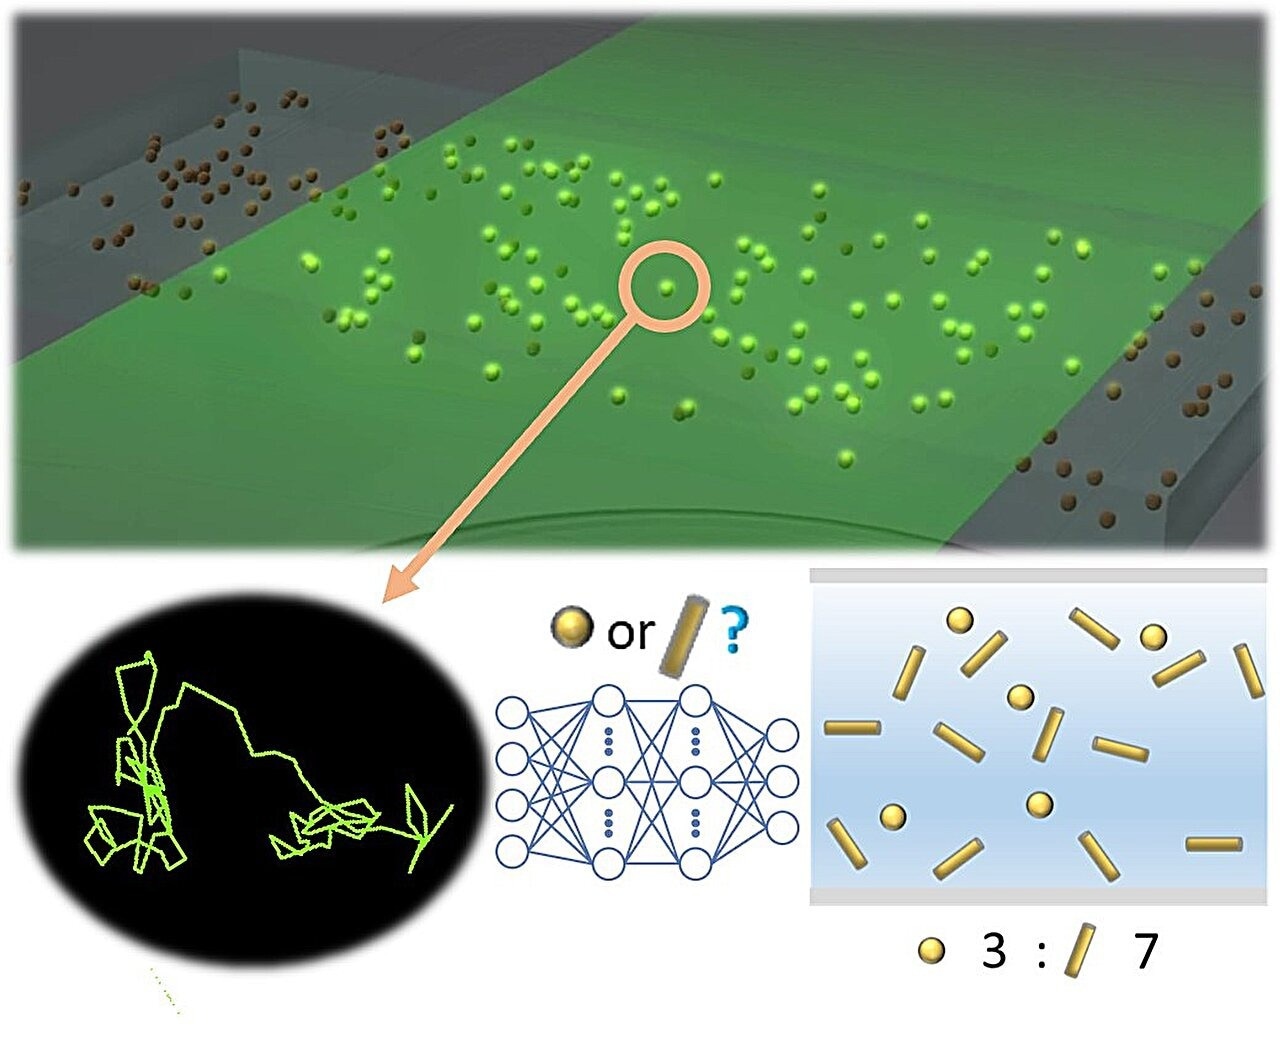 Deep Learning Tackles Nanoparticle Shape Identification Challenges